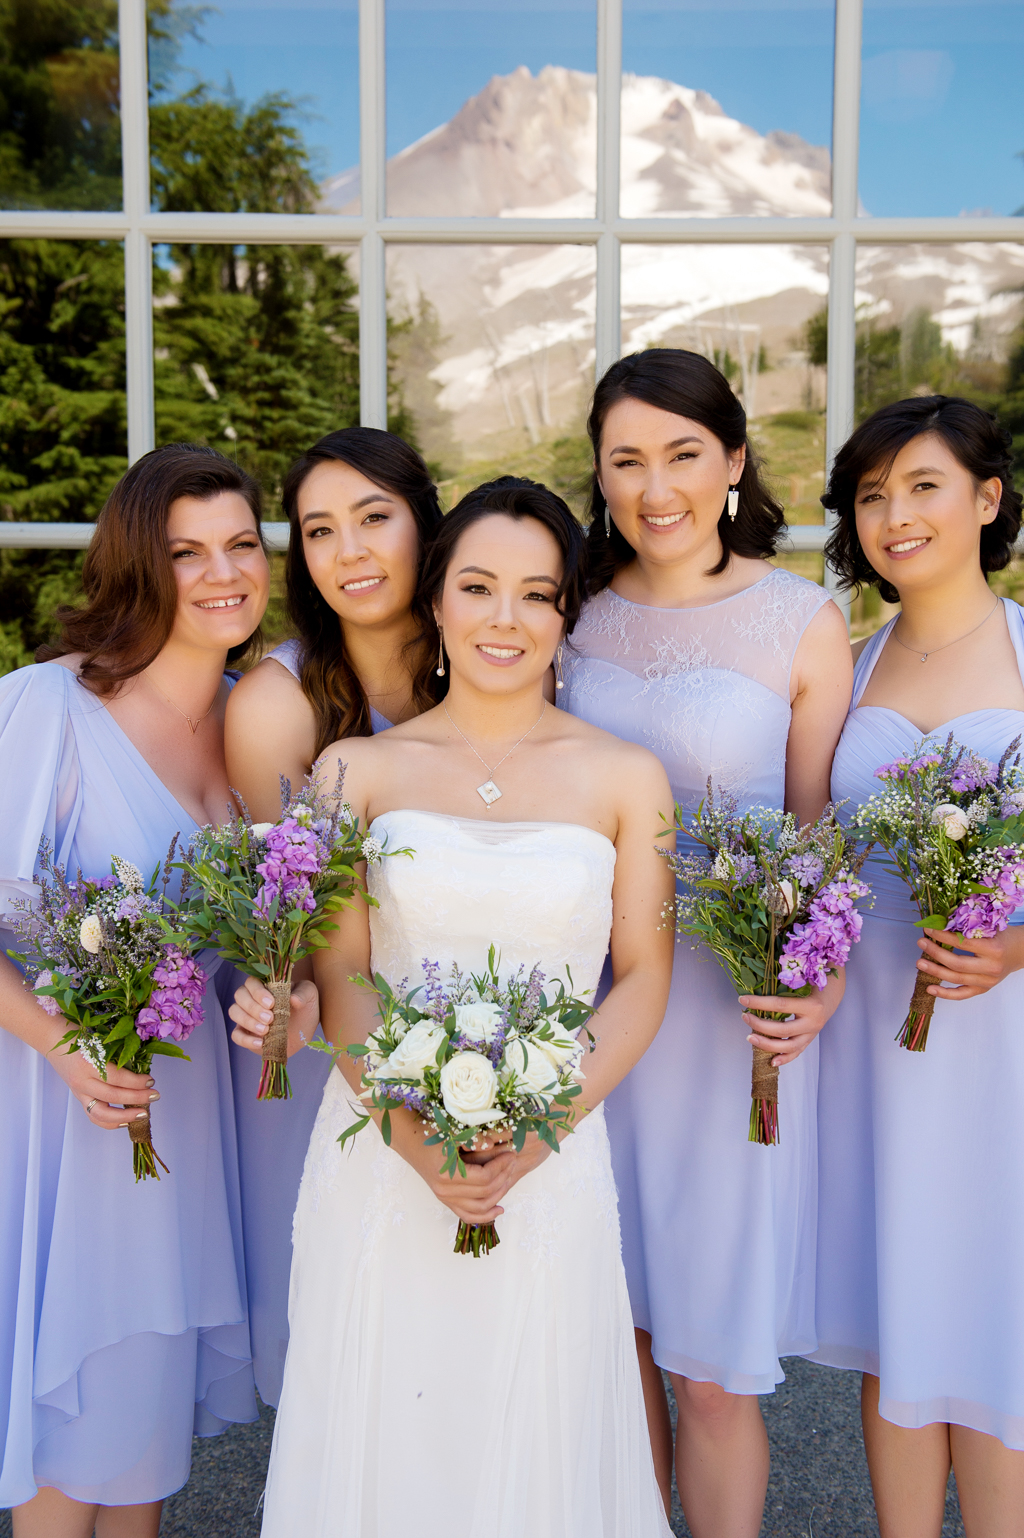 bridesmaids in purple dresses hug around bride with reflection of mt hood in the window behind them